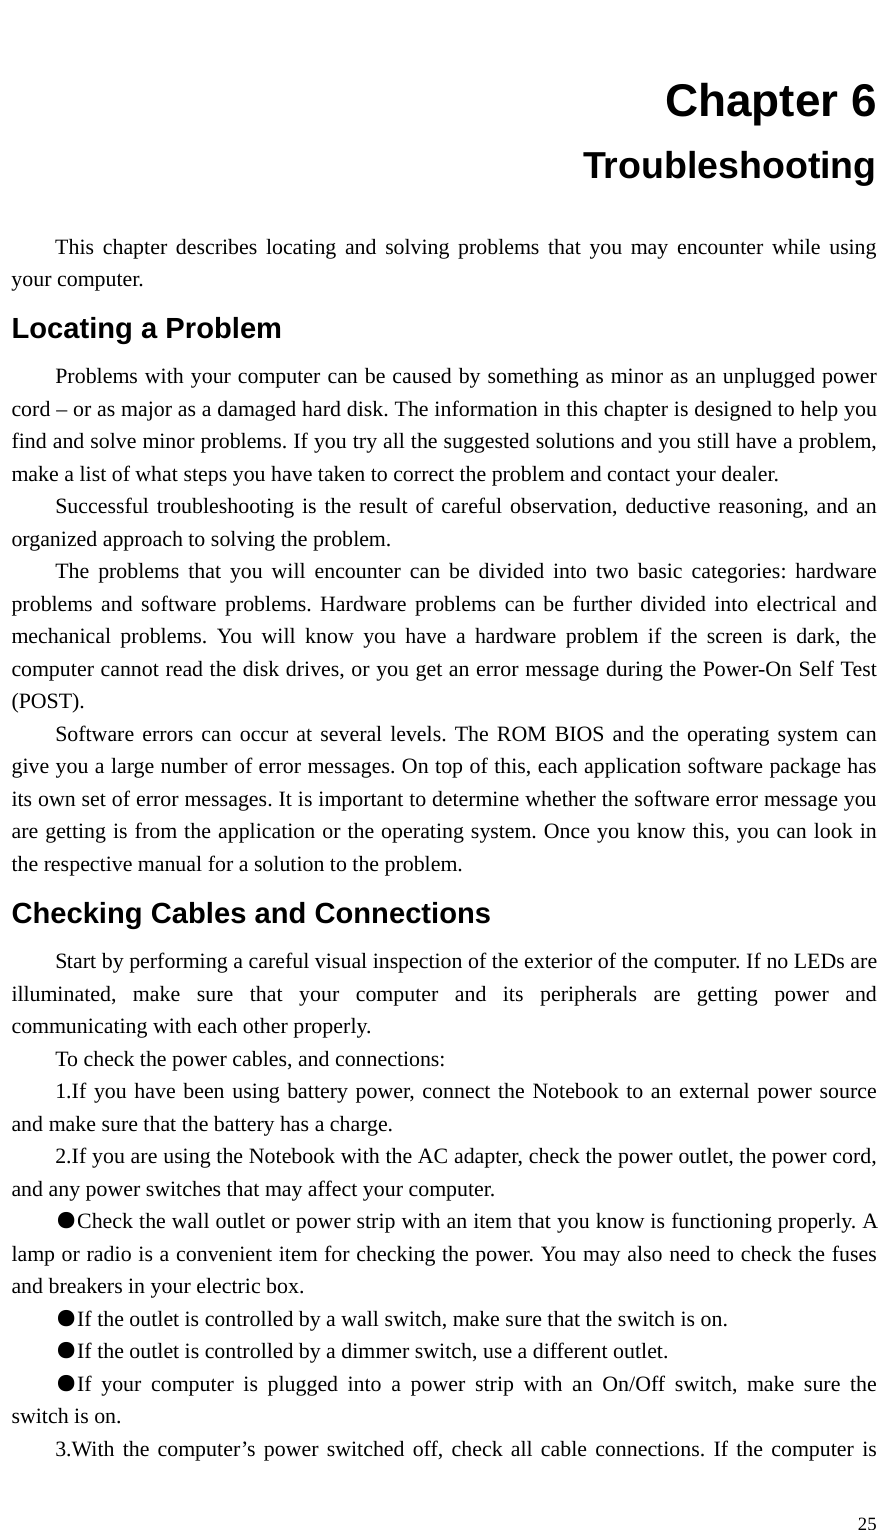   25 Chapter 6 Troubleshooting  This chapter describes locating and solving problems that you may encounter while using your computer. Locating a Problem Problems with your computer can be caused by something as minor as an unplugged power cord – or as major as a damaged hard disk. The information in this chapter is designed to help you find and solve minor problems. If you try all the suggested solutions and you still have a problem, make a list of what steps you have taken to correct the problem and contact your dealer. Successful troubleshooting is the result of careful observation, deductive reasoning, and an organized approach to solving the problem. The problems that you will encounter can be divided into two basic categories: hardware problems and software problems. Hardware problems can be further divided into electrical and mechanical problems. You will know you have a hardware problem if the screen is dark, the computer cannot read the disk drives, or you get an error message during the Power-On Self Test (POST). Software errors can occur at several levels. The ROM BIOS and the operating system can give you a large number of error messages. On top of this, each application software package has its own set of error messages. It is important to determine whether the software error message you are getting is from the application or the operating system. Once you know this, you can look in the respective manual for a solution to the problem. Checking Cables and Connections Start by performing a careful visual inspection of the exterior of the computer. If no LEDs are illuminated, make sure that your computer and its peripherals are getting power and communicating with each other properly. To check the power cables, and connections: 1.If you have been using battery power, connect the Notebook to an external power source and make sure that the battery has a charge. 2.If you are using the Notebook with the AC adapter, check the power outlet, the power cord, and any power switches that may affect your computer. ●Check the wall outlet or power strip with an item that you know is functioning properly. A lamp or radio is a convenient item for checking the power. You may also need to check the fuses and breakers in your electric box. ●If the outlet is controlled by a wall switch, make sure that the switch is on. ●If the outlet is controlled by a dimmer switch, use a different outlet. ●If your computer is plugged into a power strip with an On/Off switch, make sure the switch is on. 3.With the computer’s power switched off, check all cable connections. If the computer is 